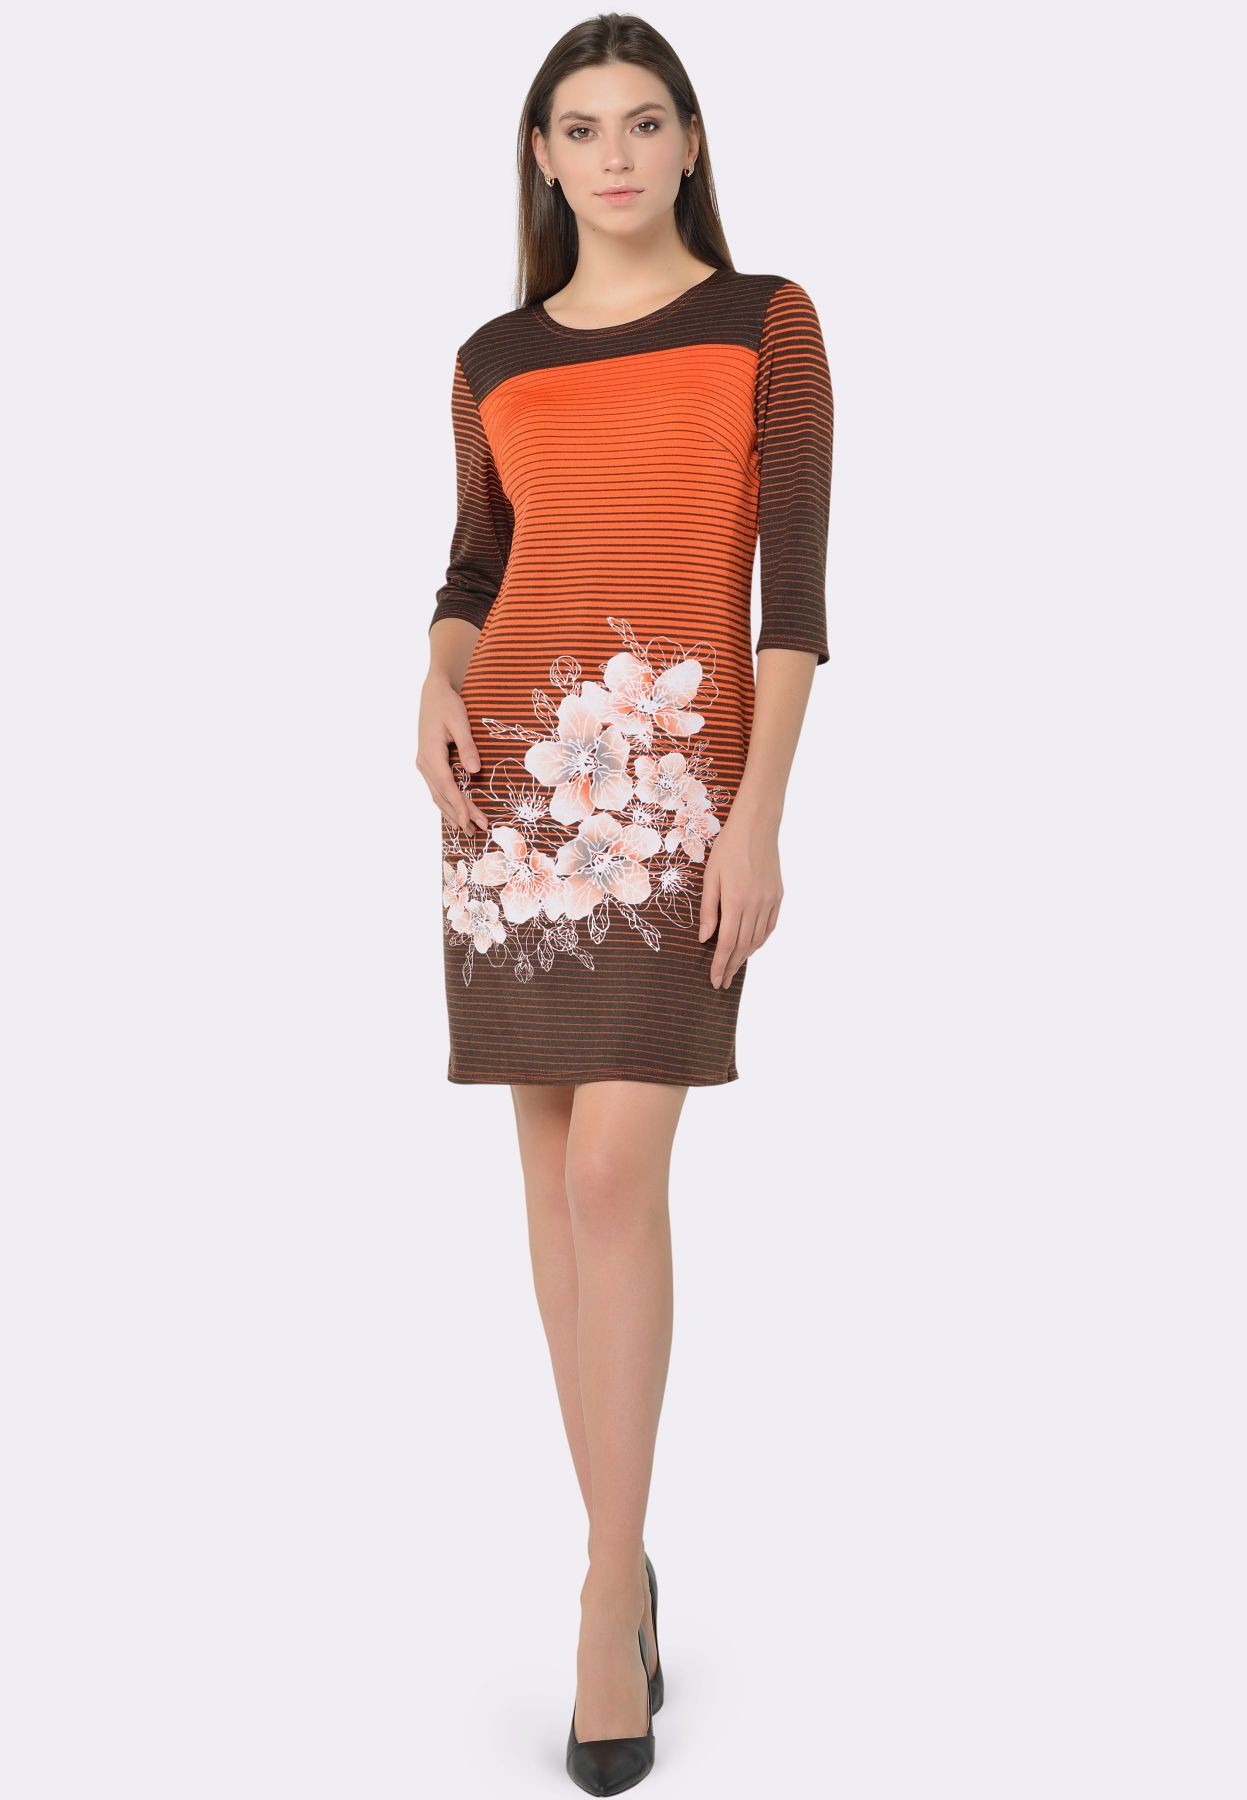 Knitted dress in a stripe with a floral pattern 5616